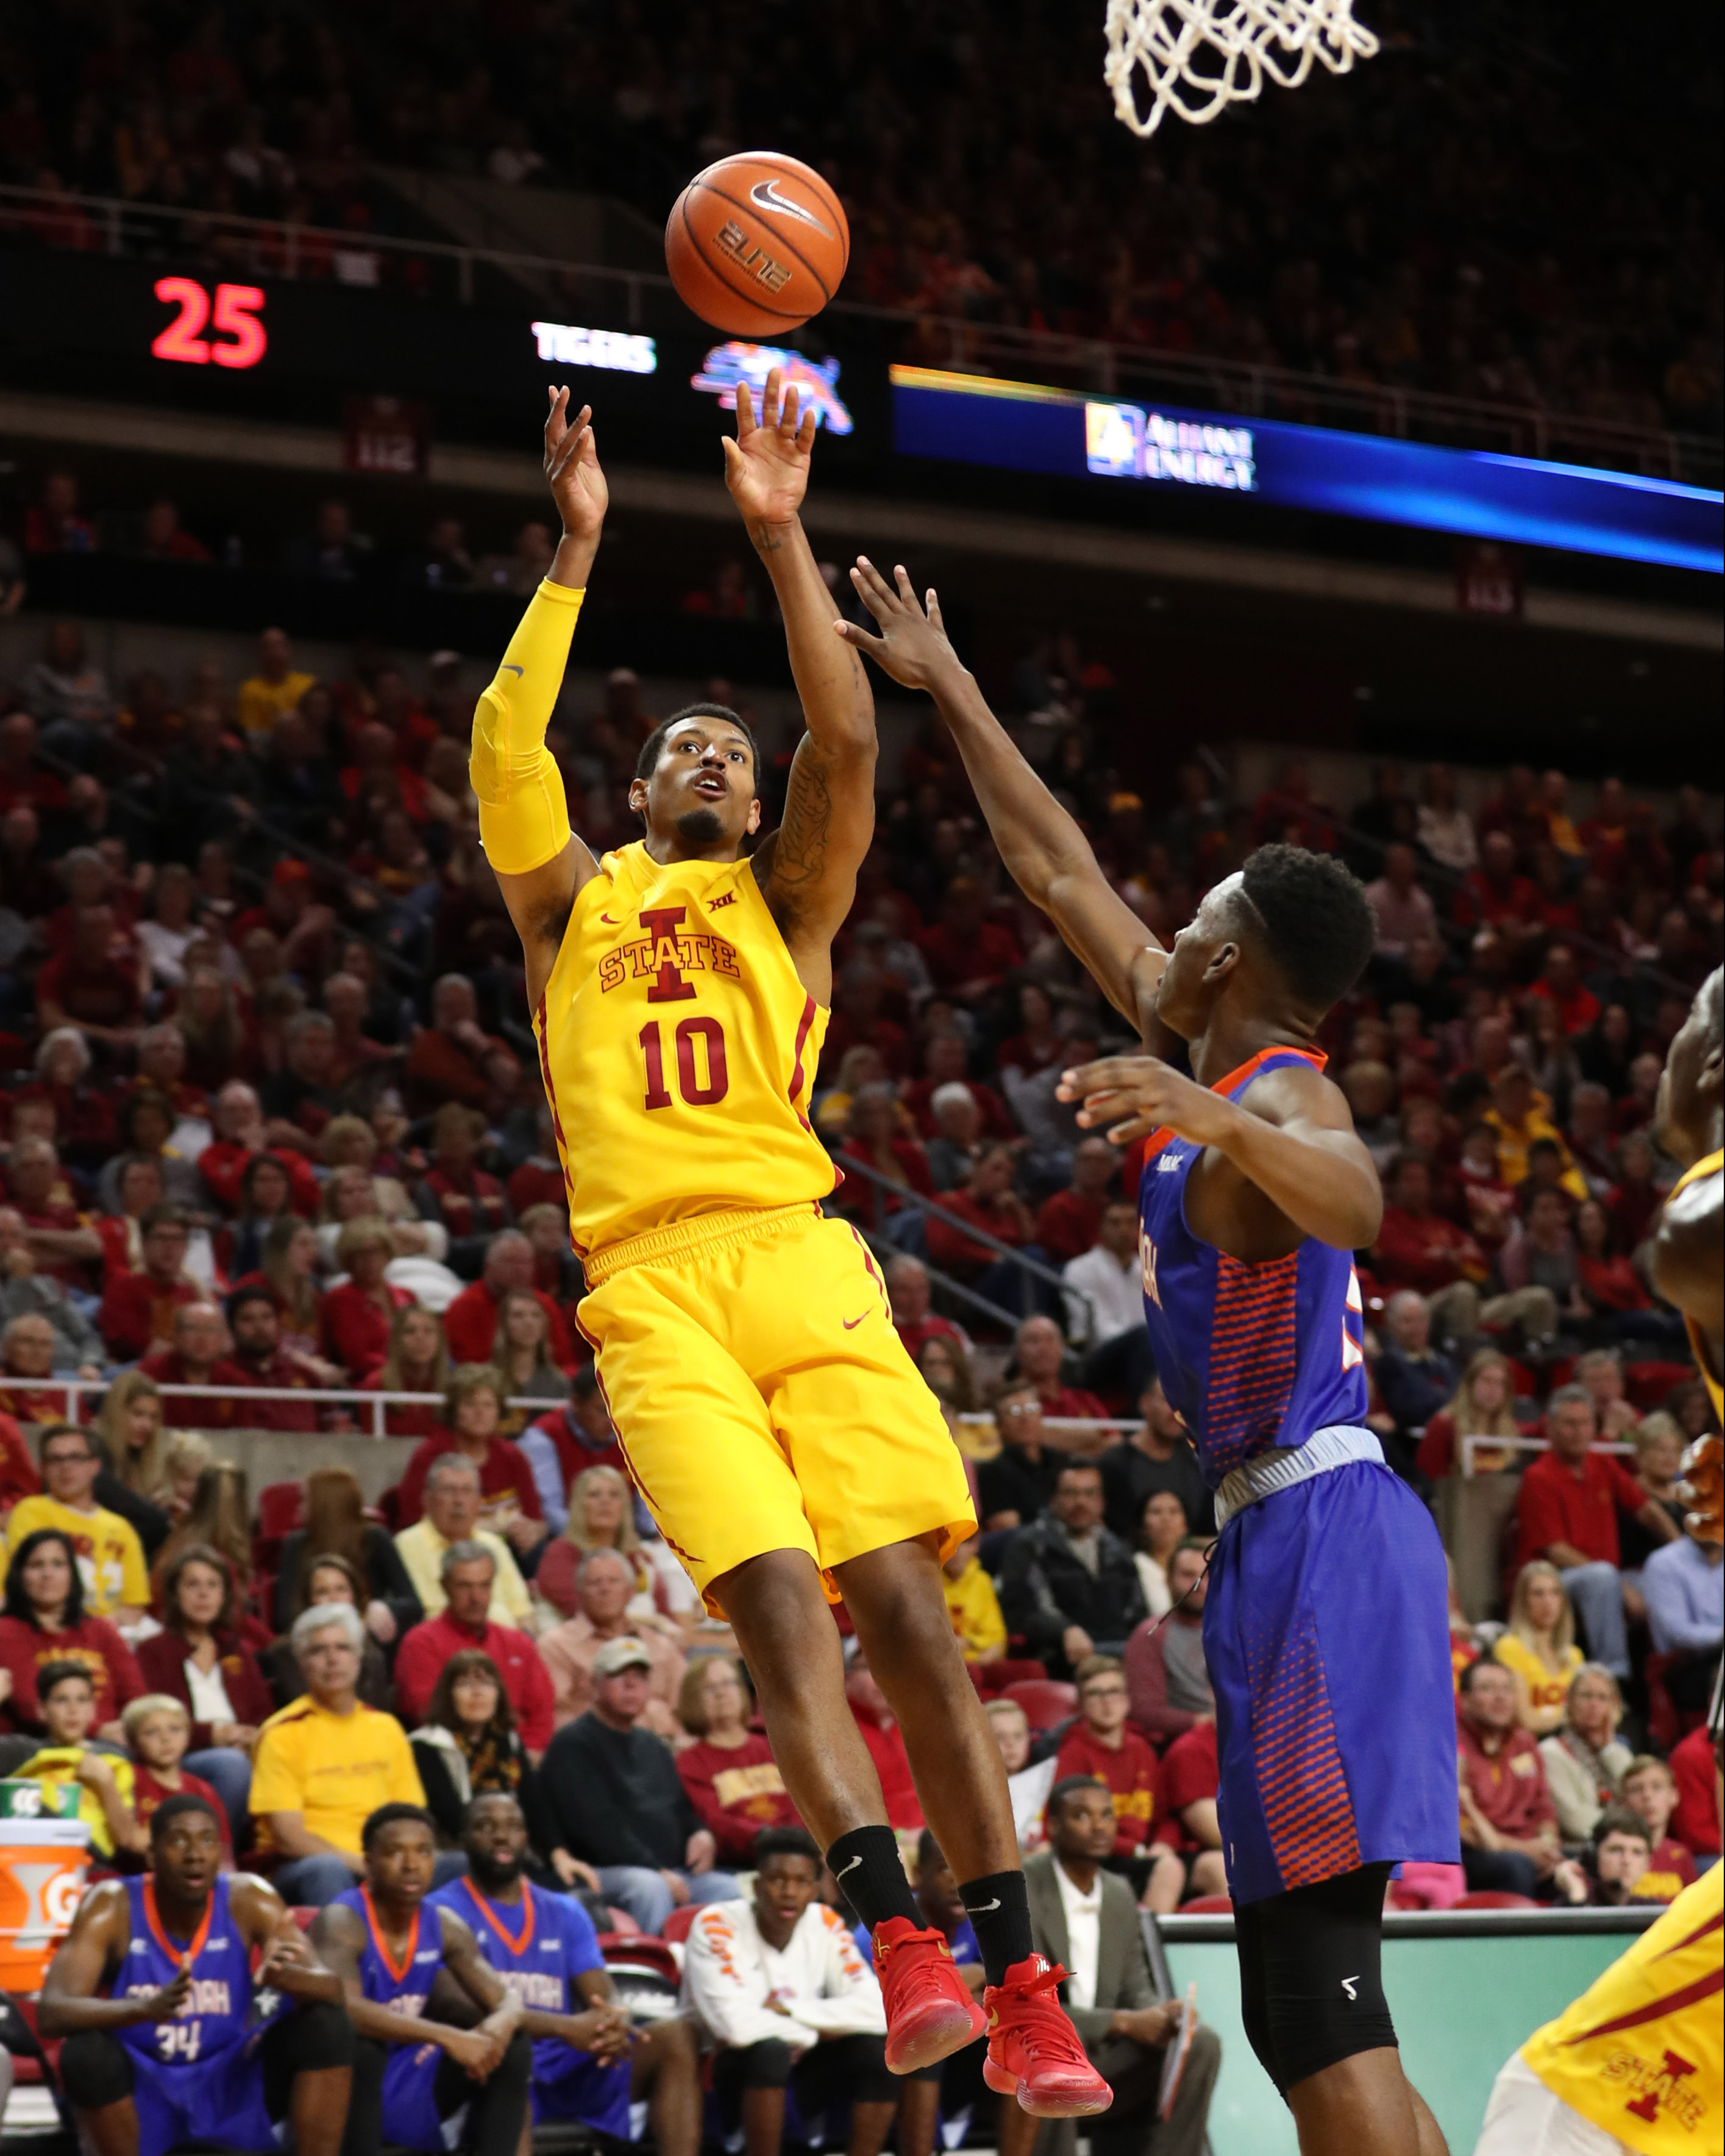 Nov 11, 2016; Ames, IA, USA; Iowa State Cyclones forward Darrell Bowie (10) shoots against the Savannah State Tigers at James H. Hilton Coliseum. Mandatory Credit: Reese Strickland-USA TODAY Sports